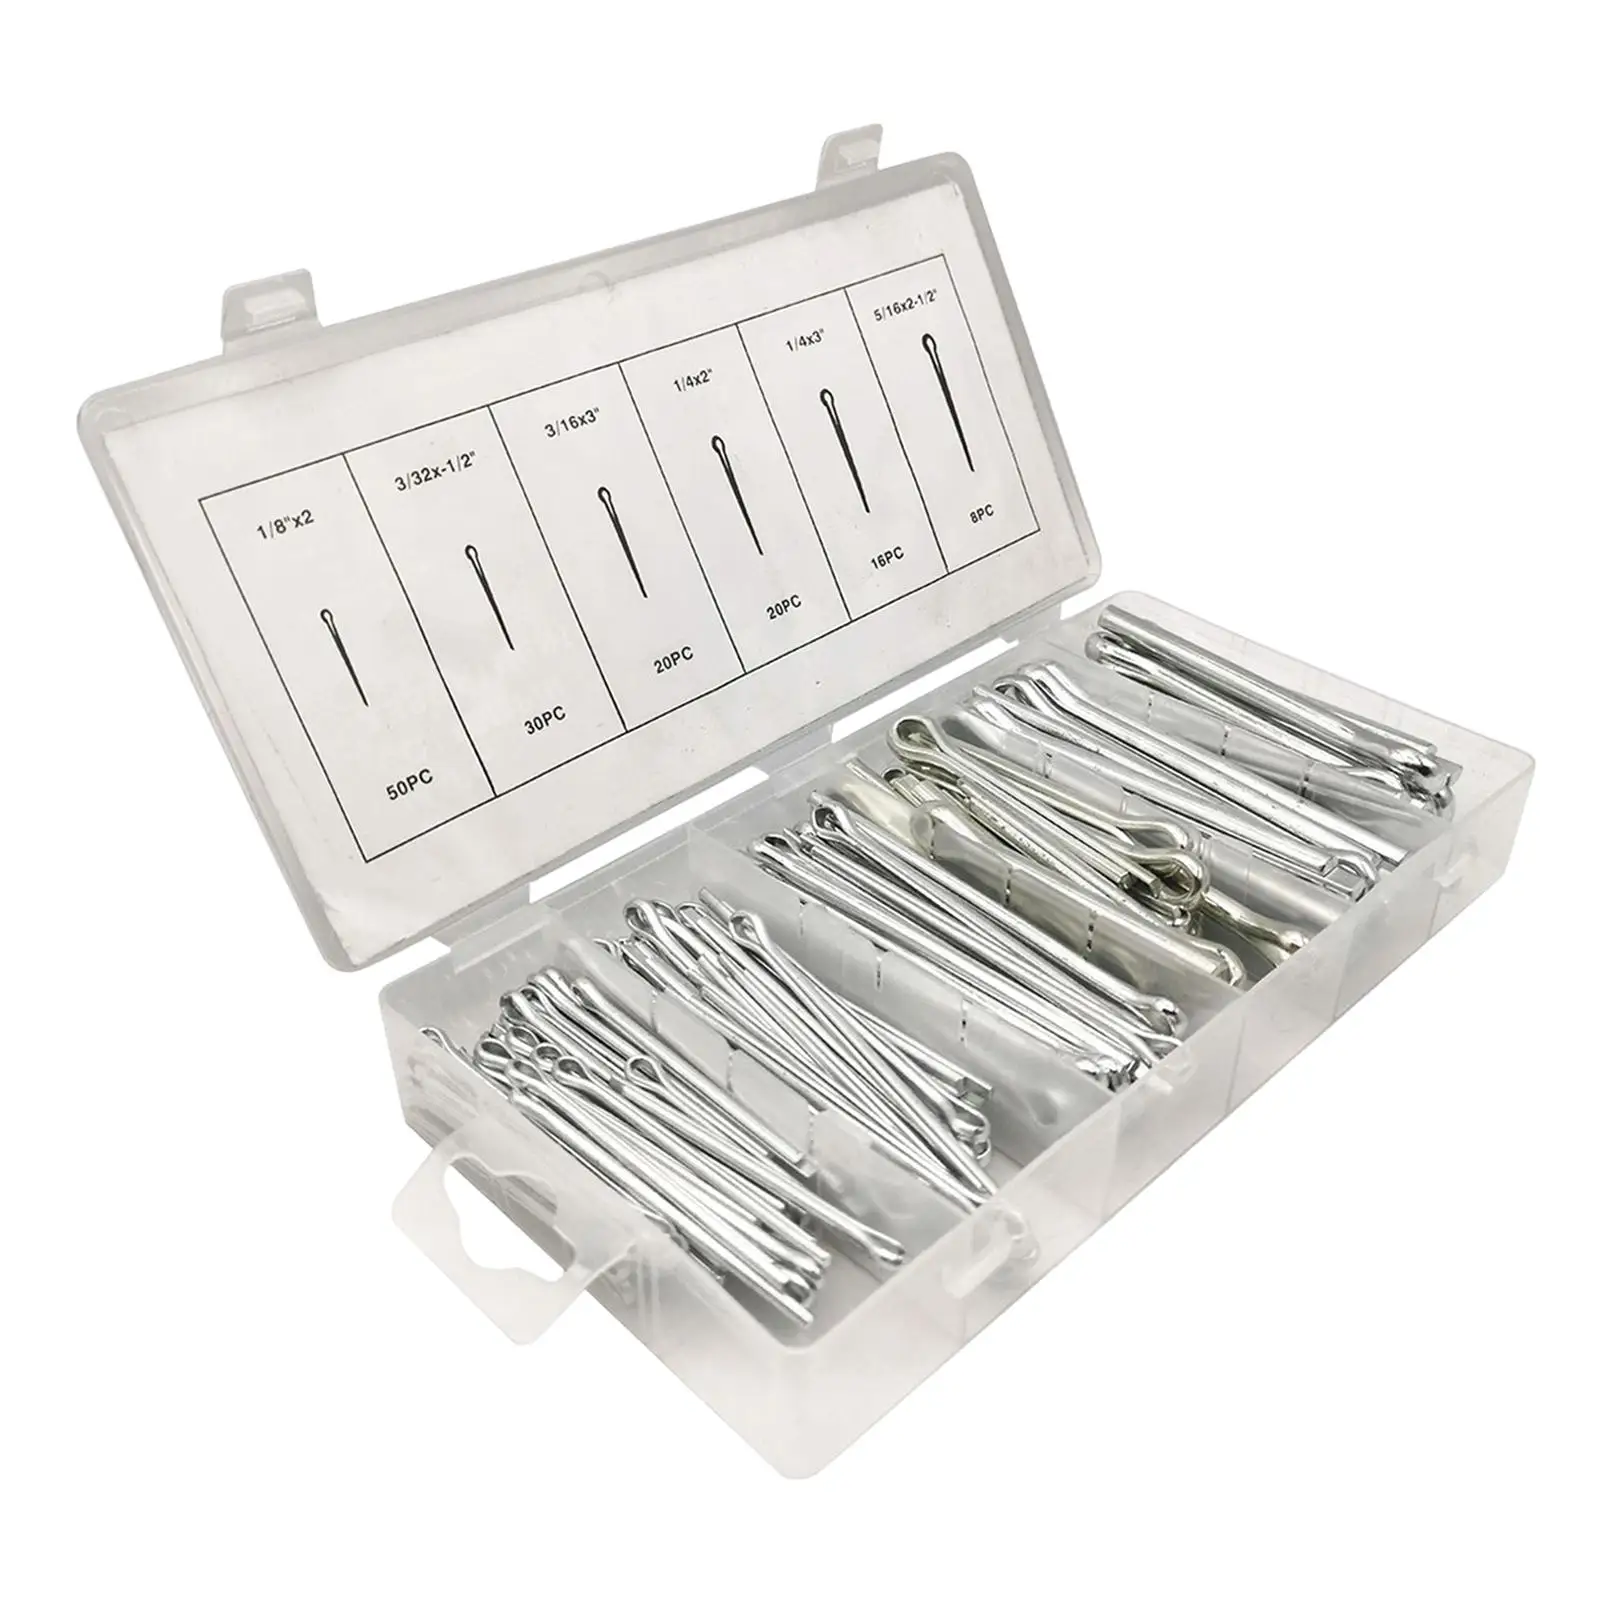 144x Assorted Split Cotter Pins Heavy Duty Fasteners Fixings assortment Premium Quality Holds Pins or Castle Nuts in Place